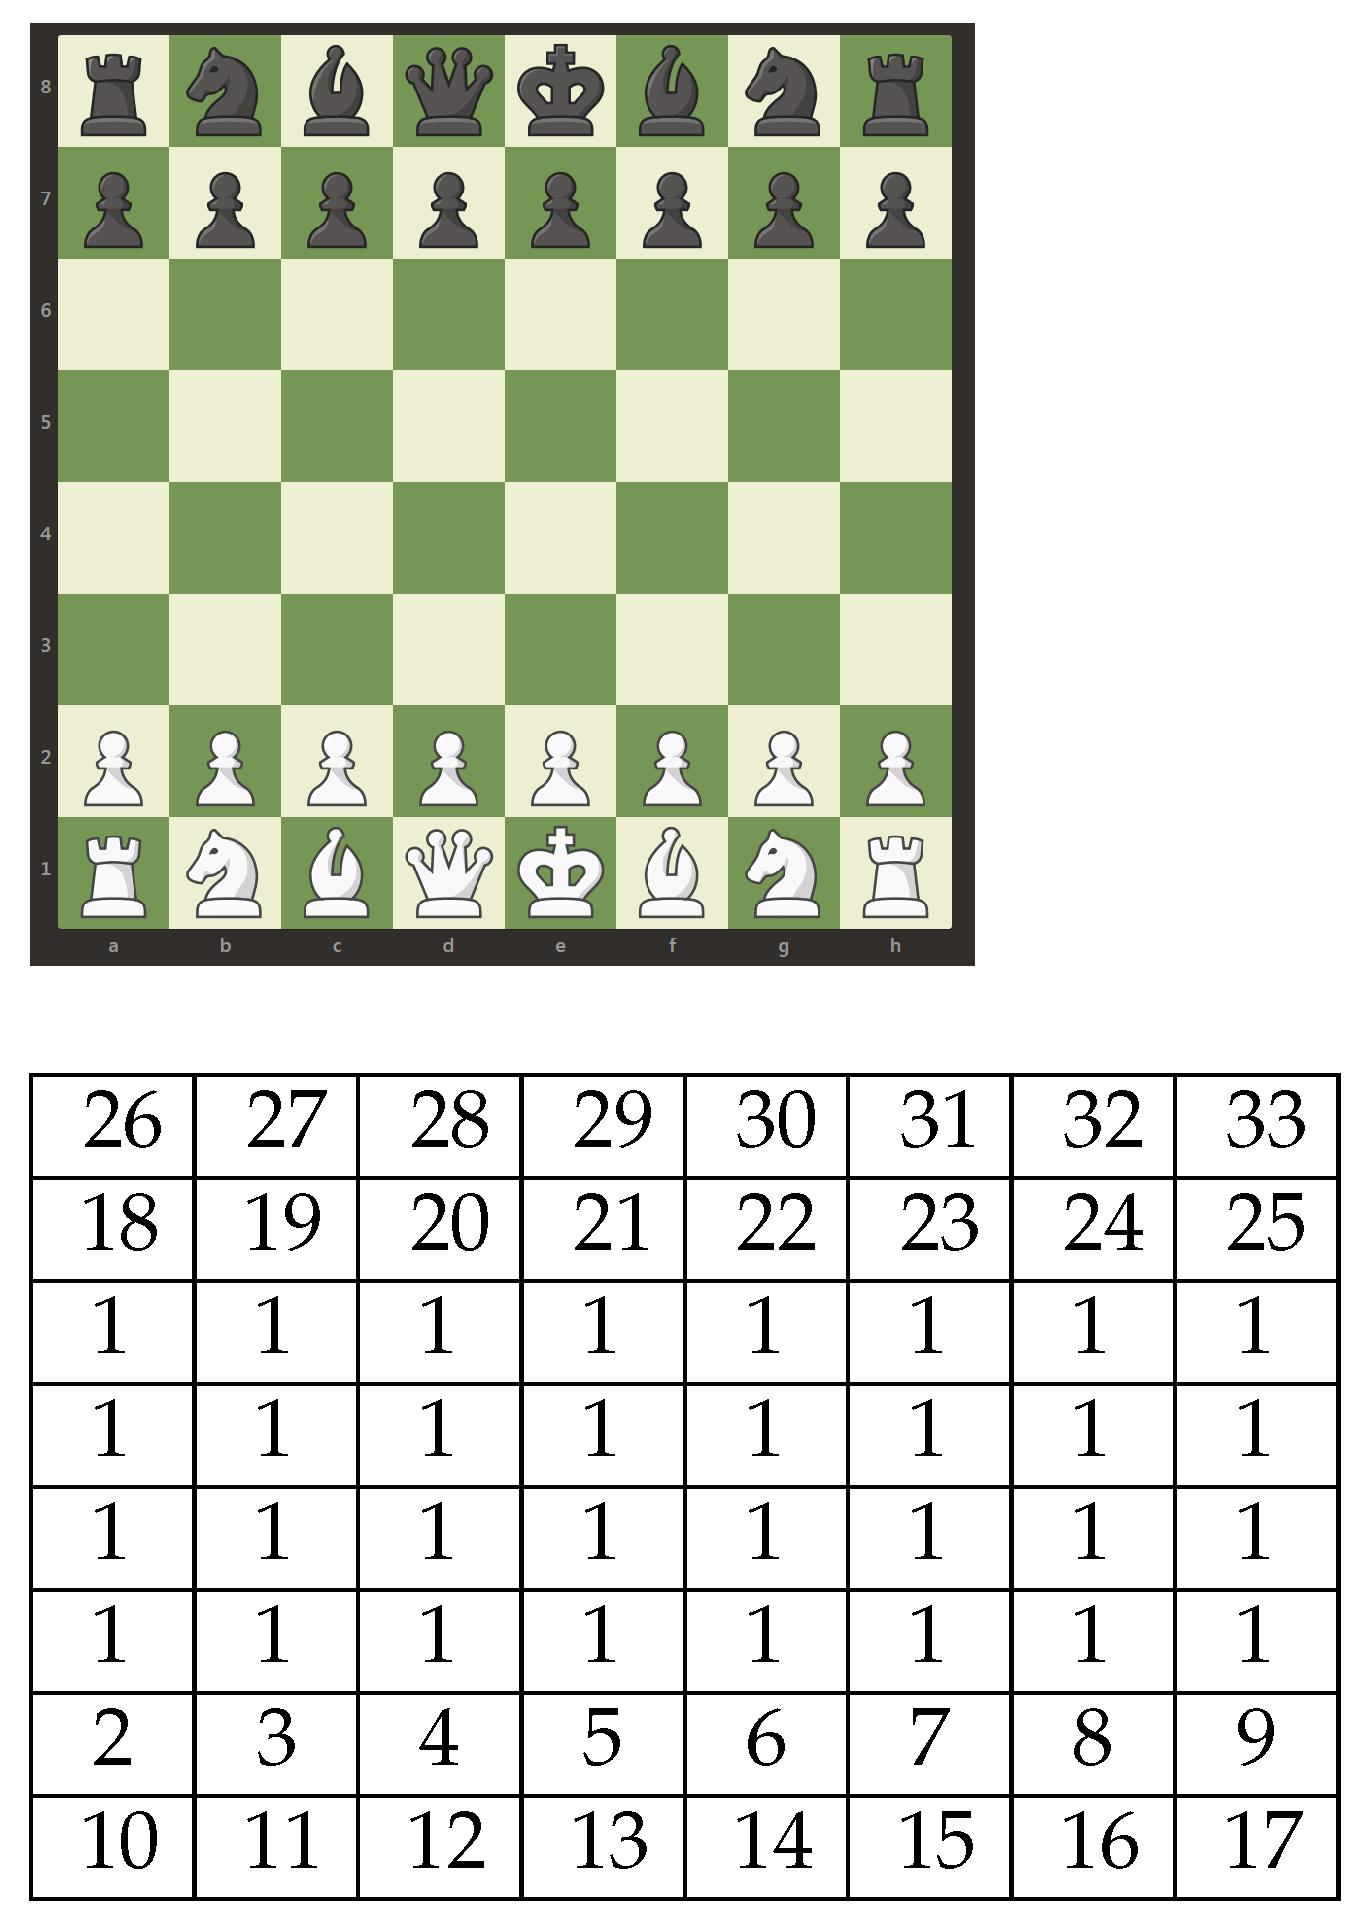 Coded Message chess puzzle. - Chess Forums 